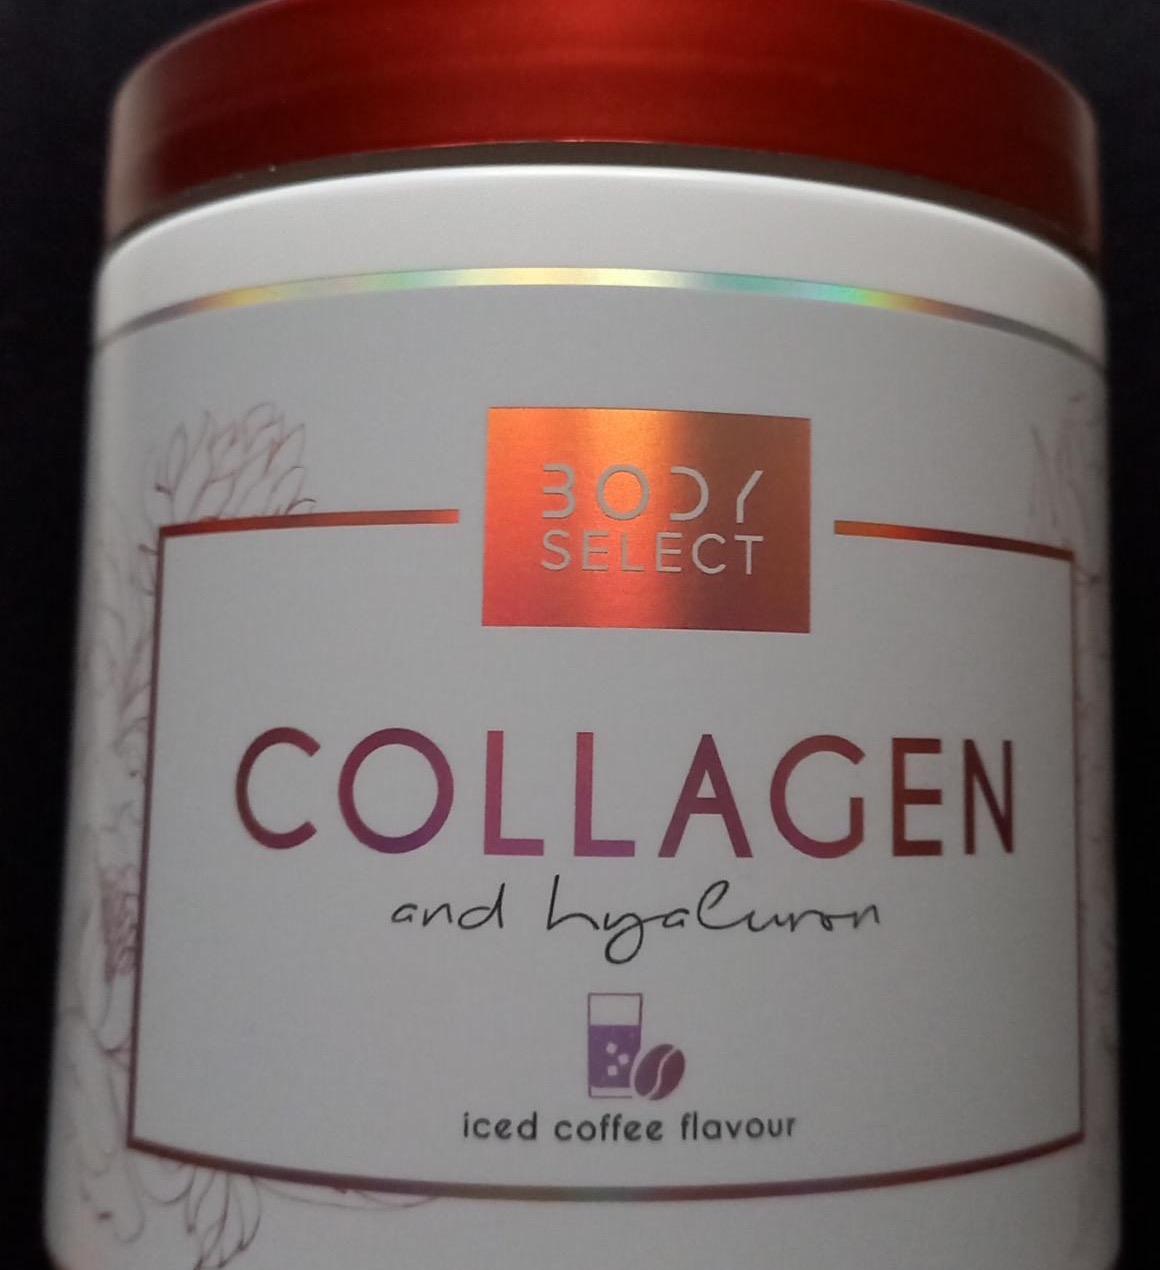 Képek - Collagen and hyaluron iced coffee flavour Body Select